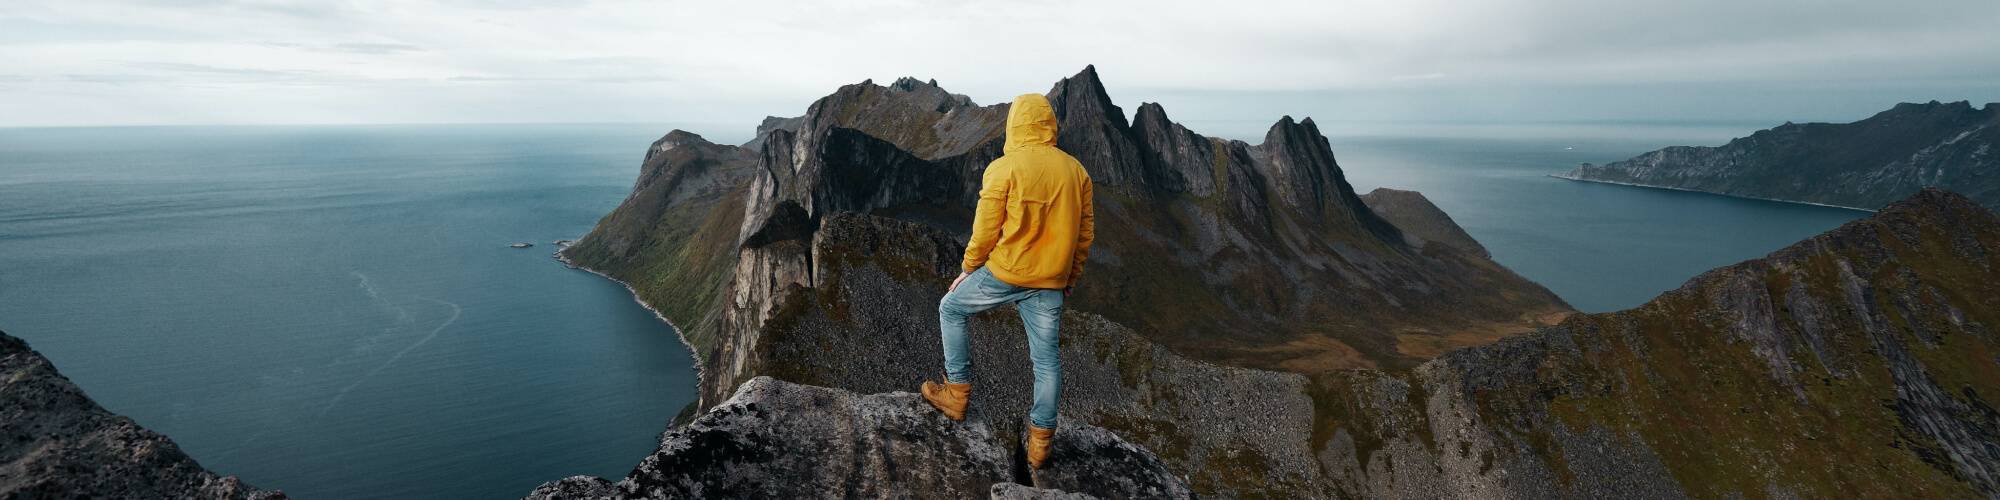 man in a yellow sweater stands on a cliff edge overlooking a montain range and sea